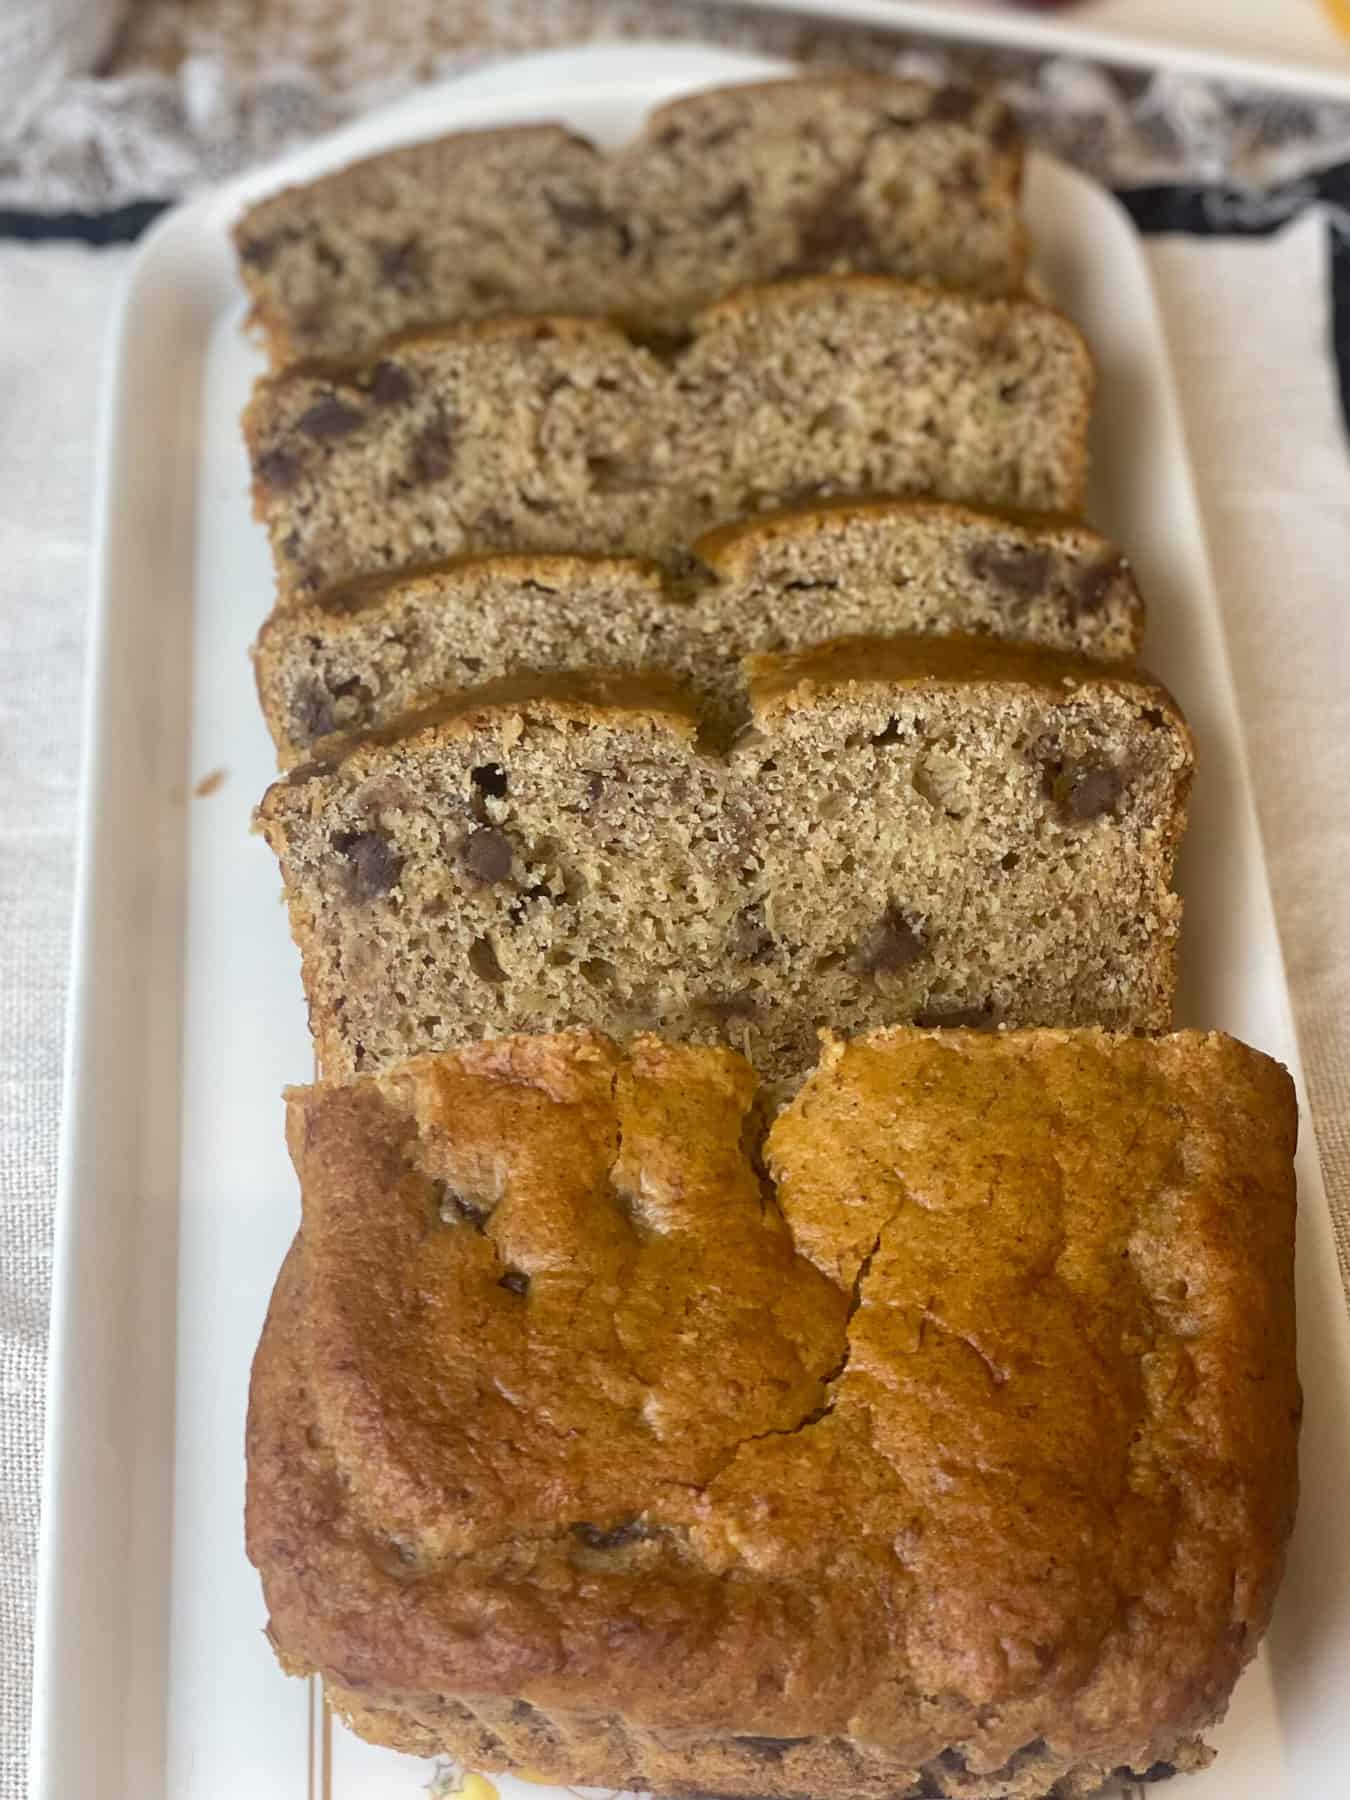 A tray of banana bread slices with whole chunk of bread at front.